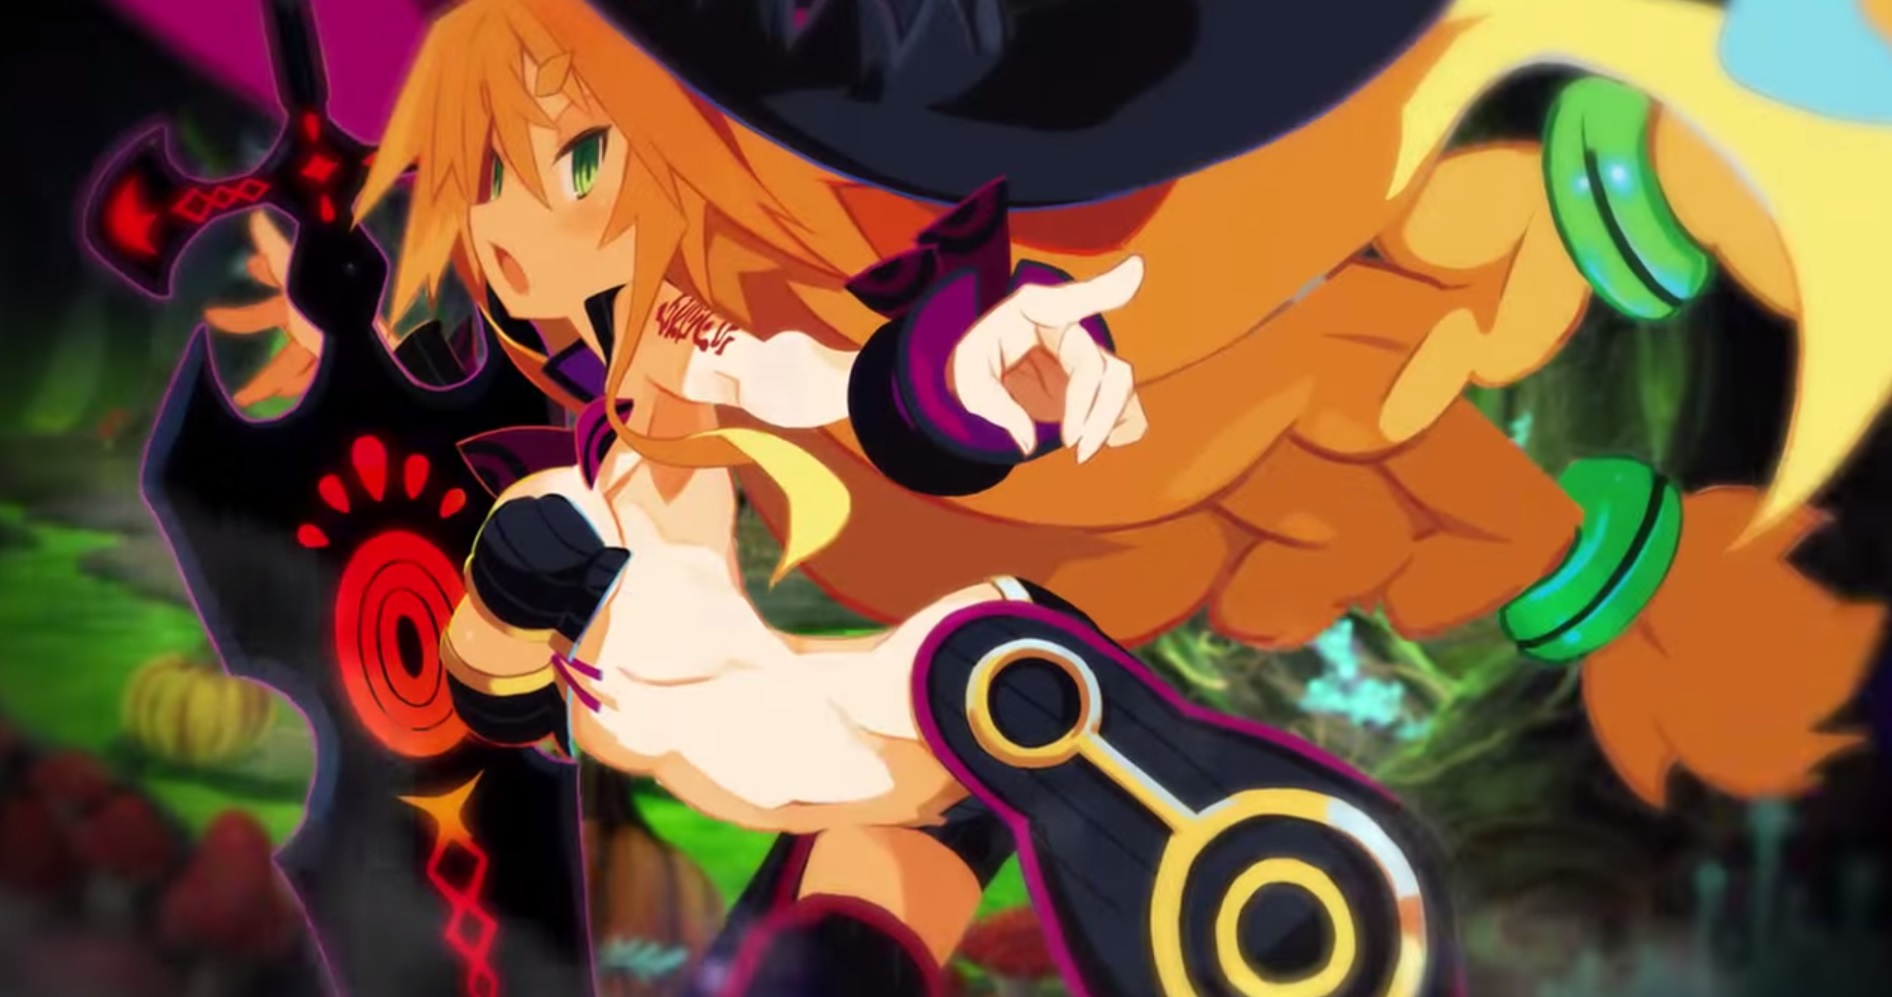 The Witch and the Hundred Knight Revival Edition